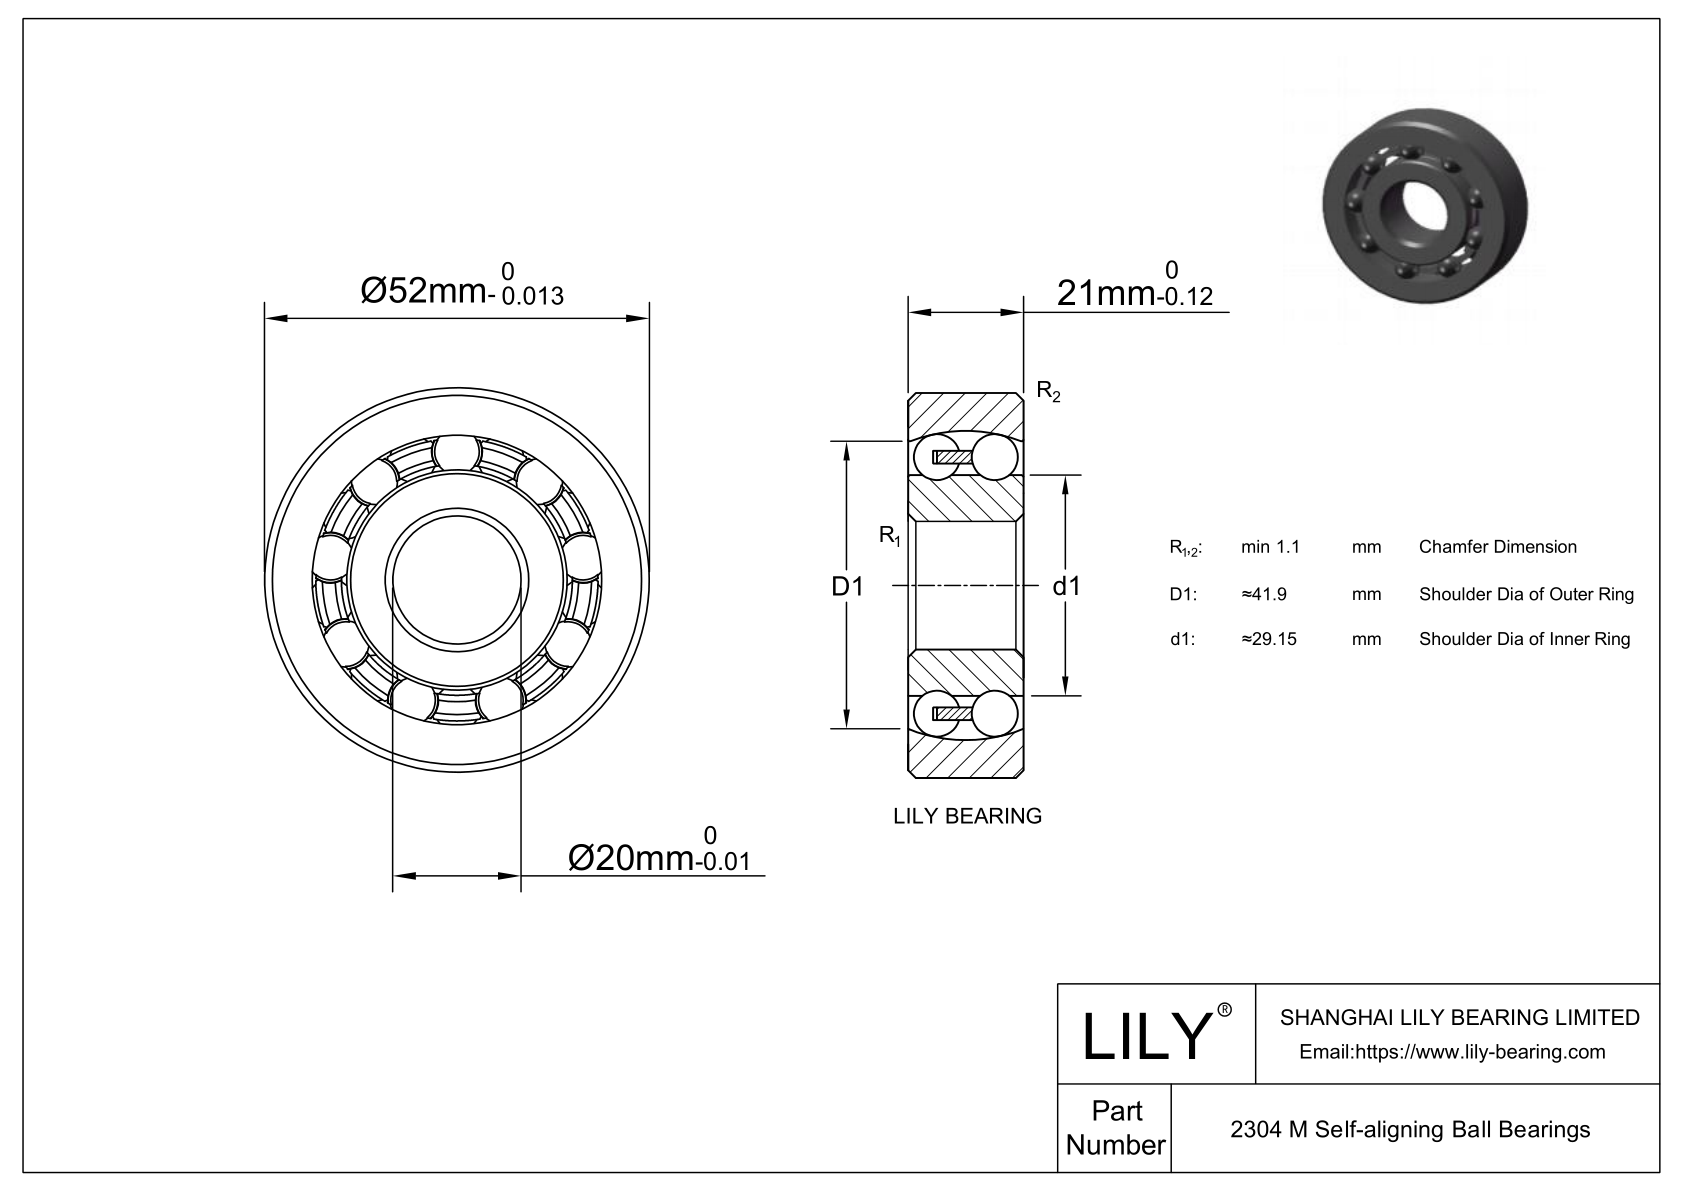 S2304 M Stainless Steel Self Aligning Ball Bearings cad drawing